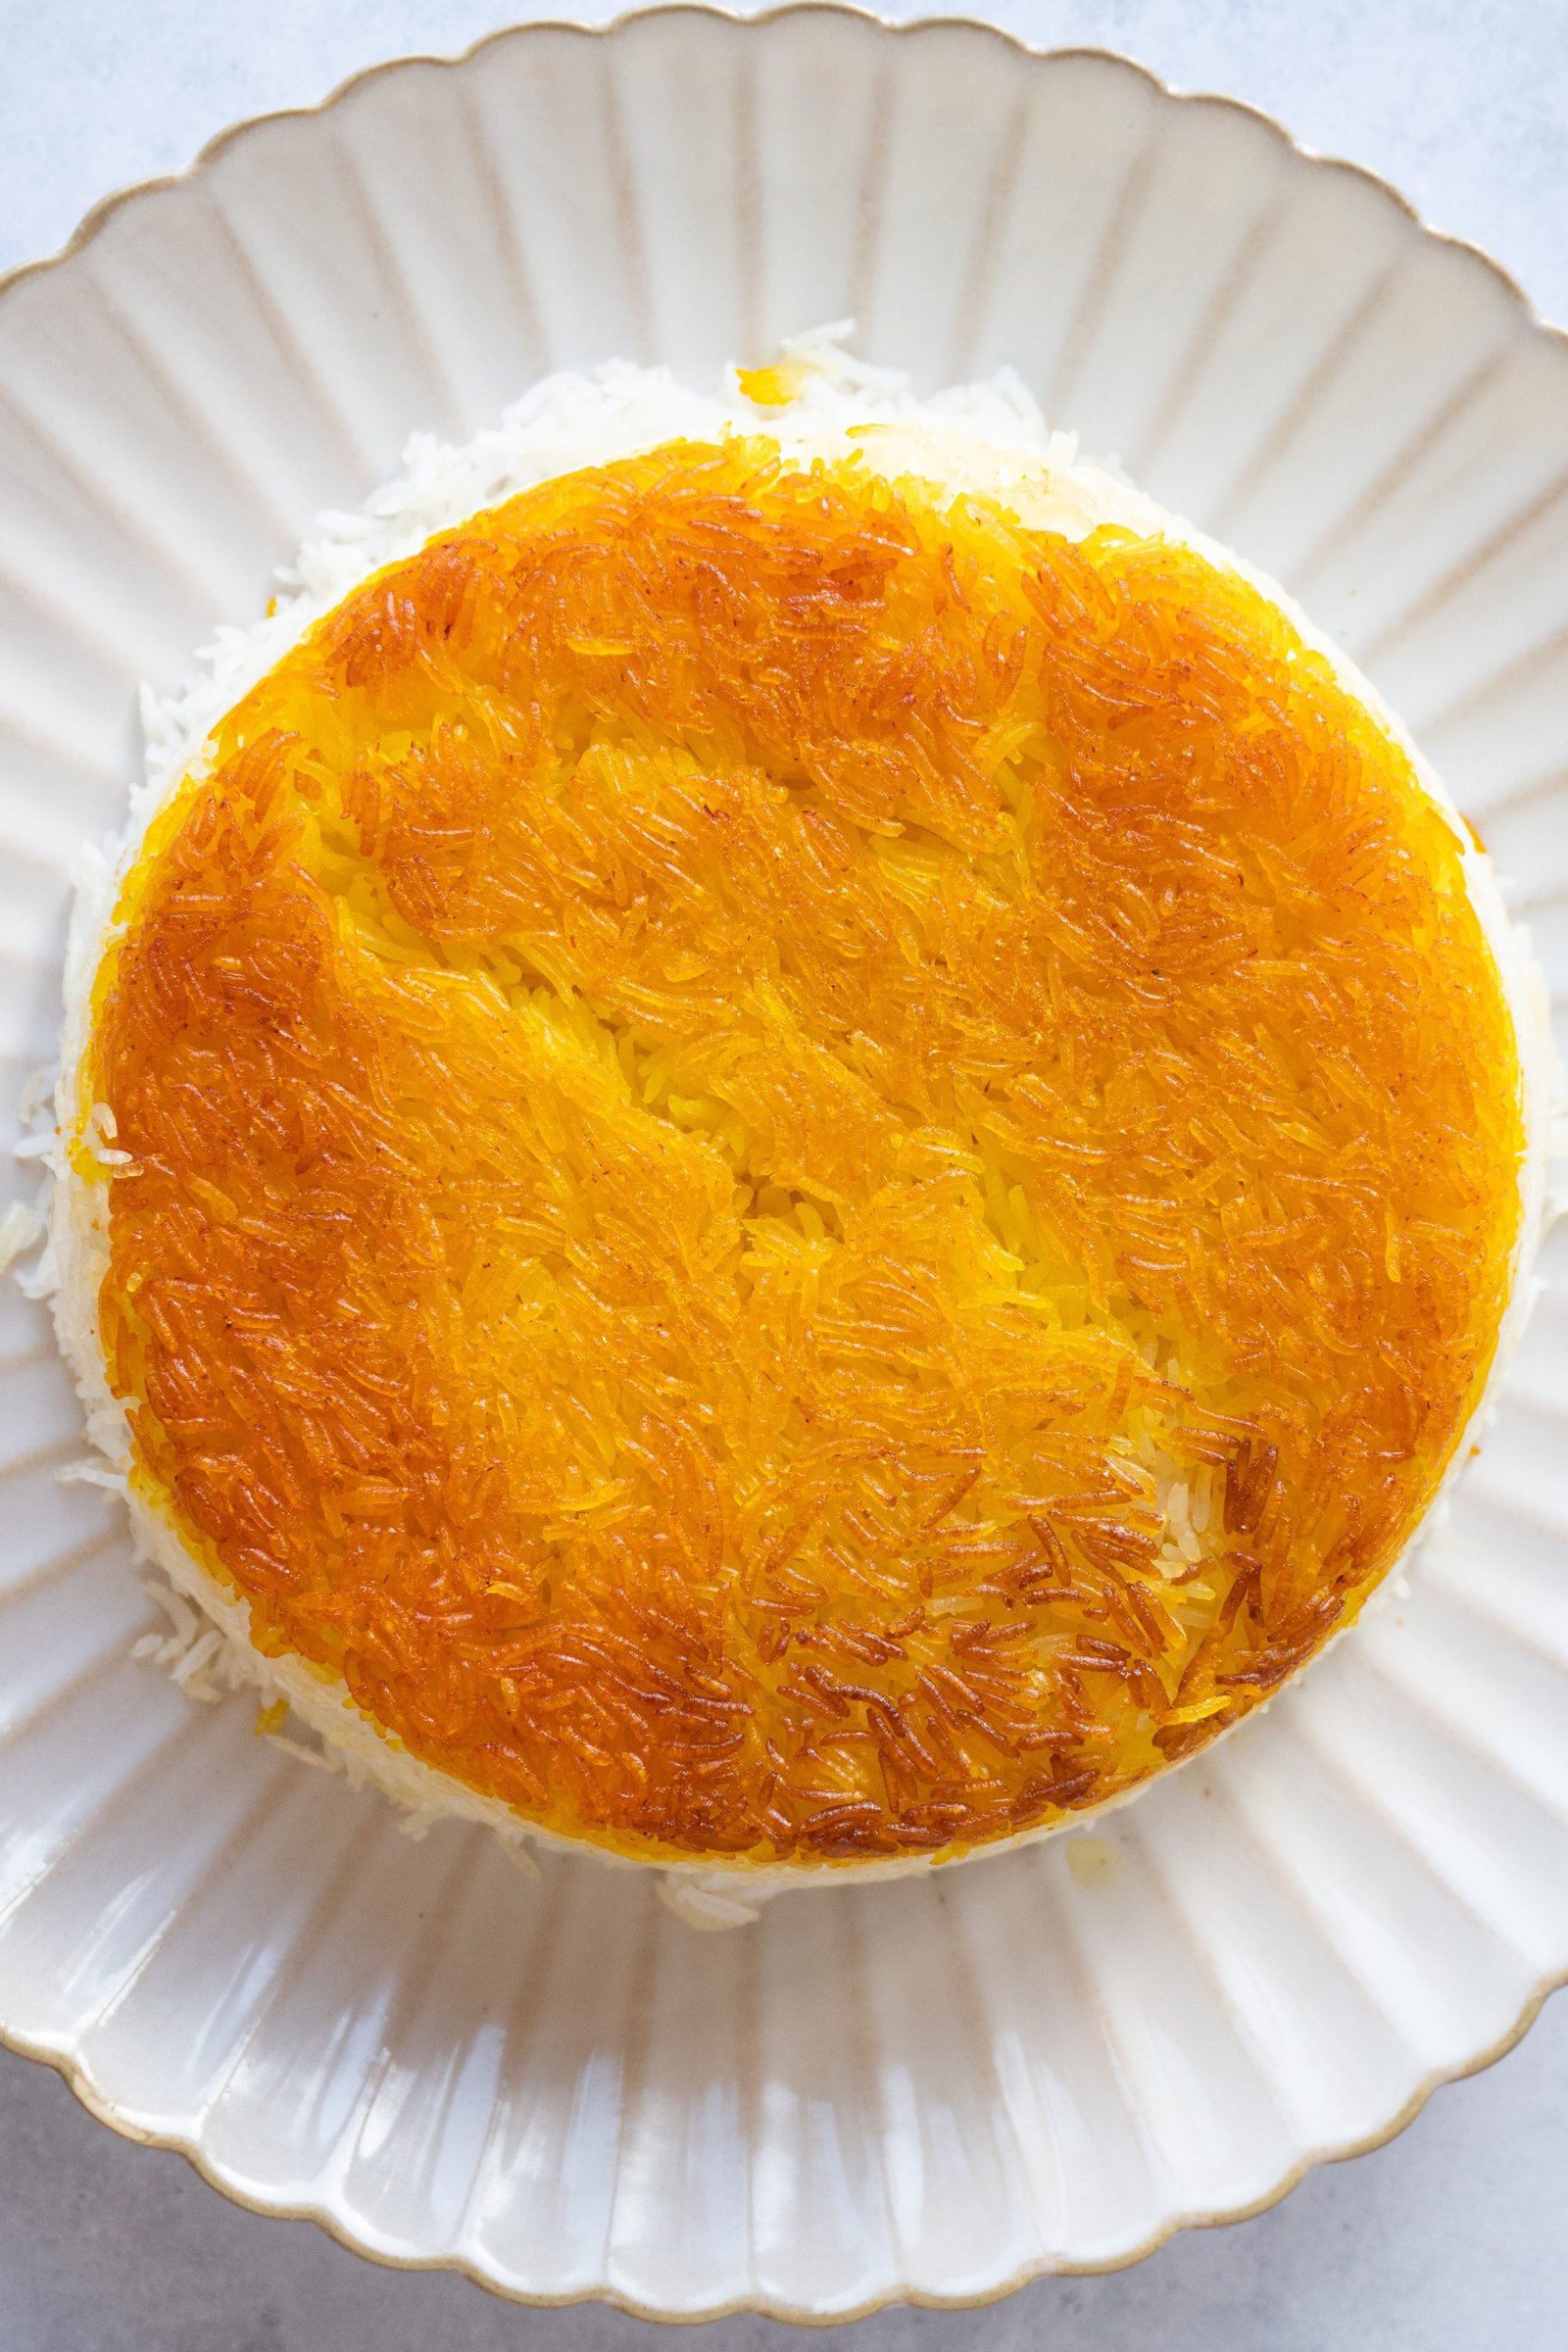 An image of a golden saffron crispy tahdige from the side, showcasing the layers of fluffy rice and crispy crust